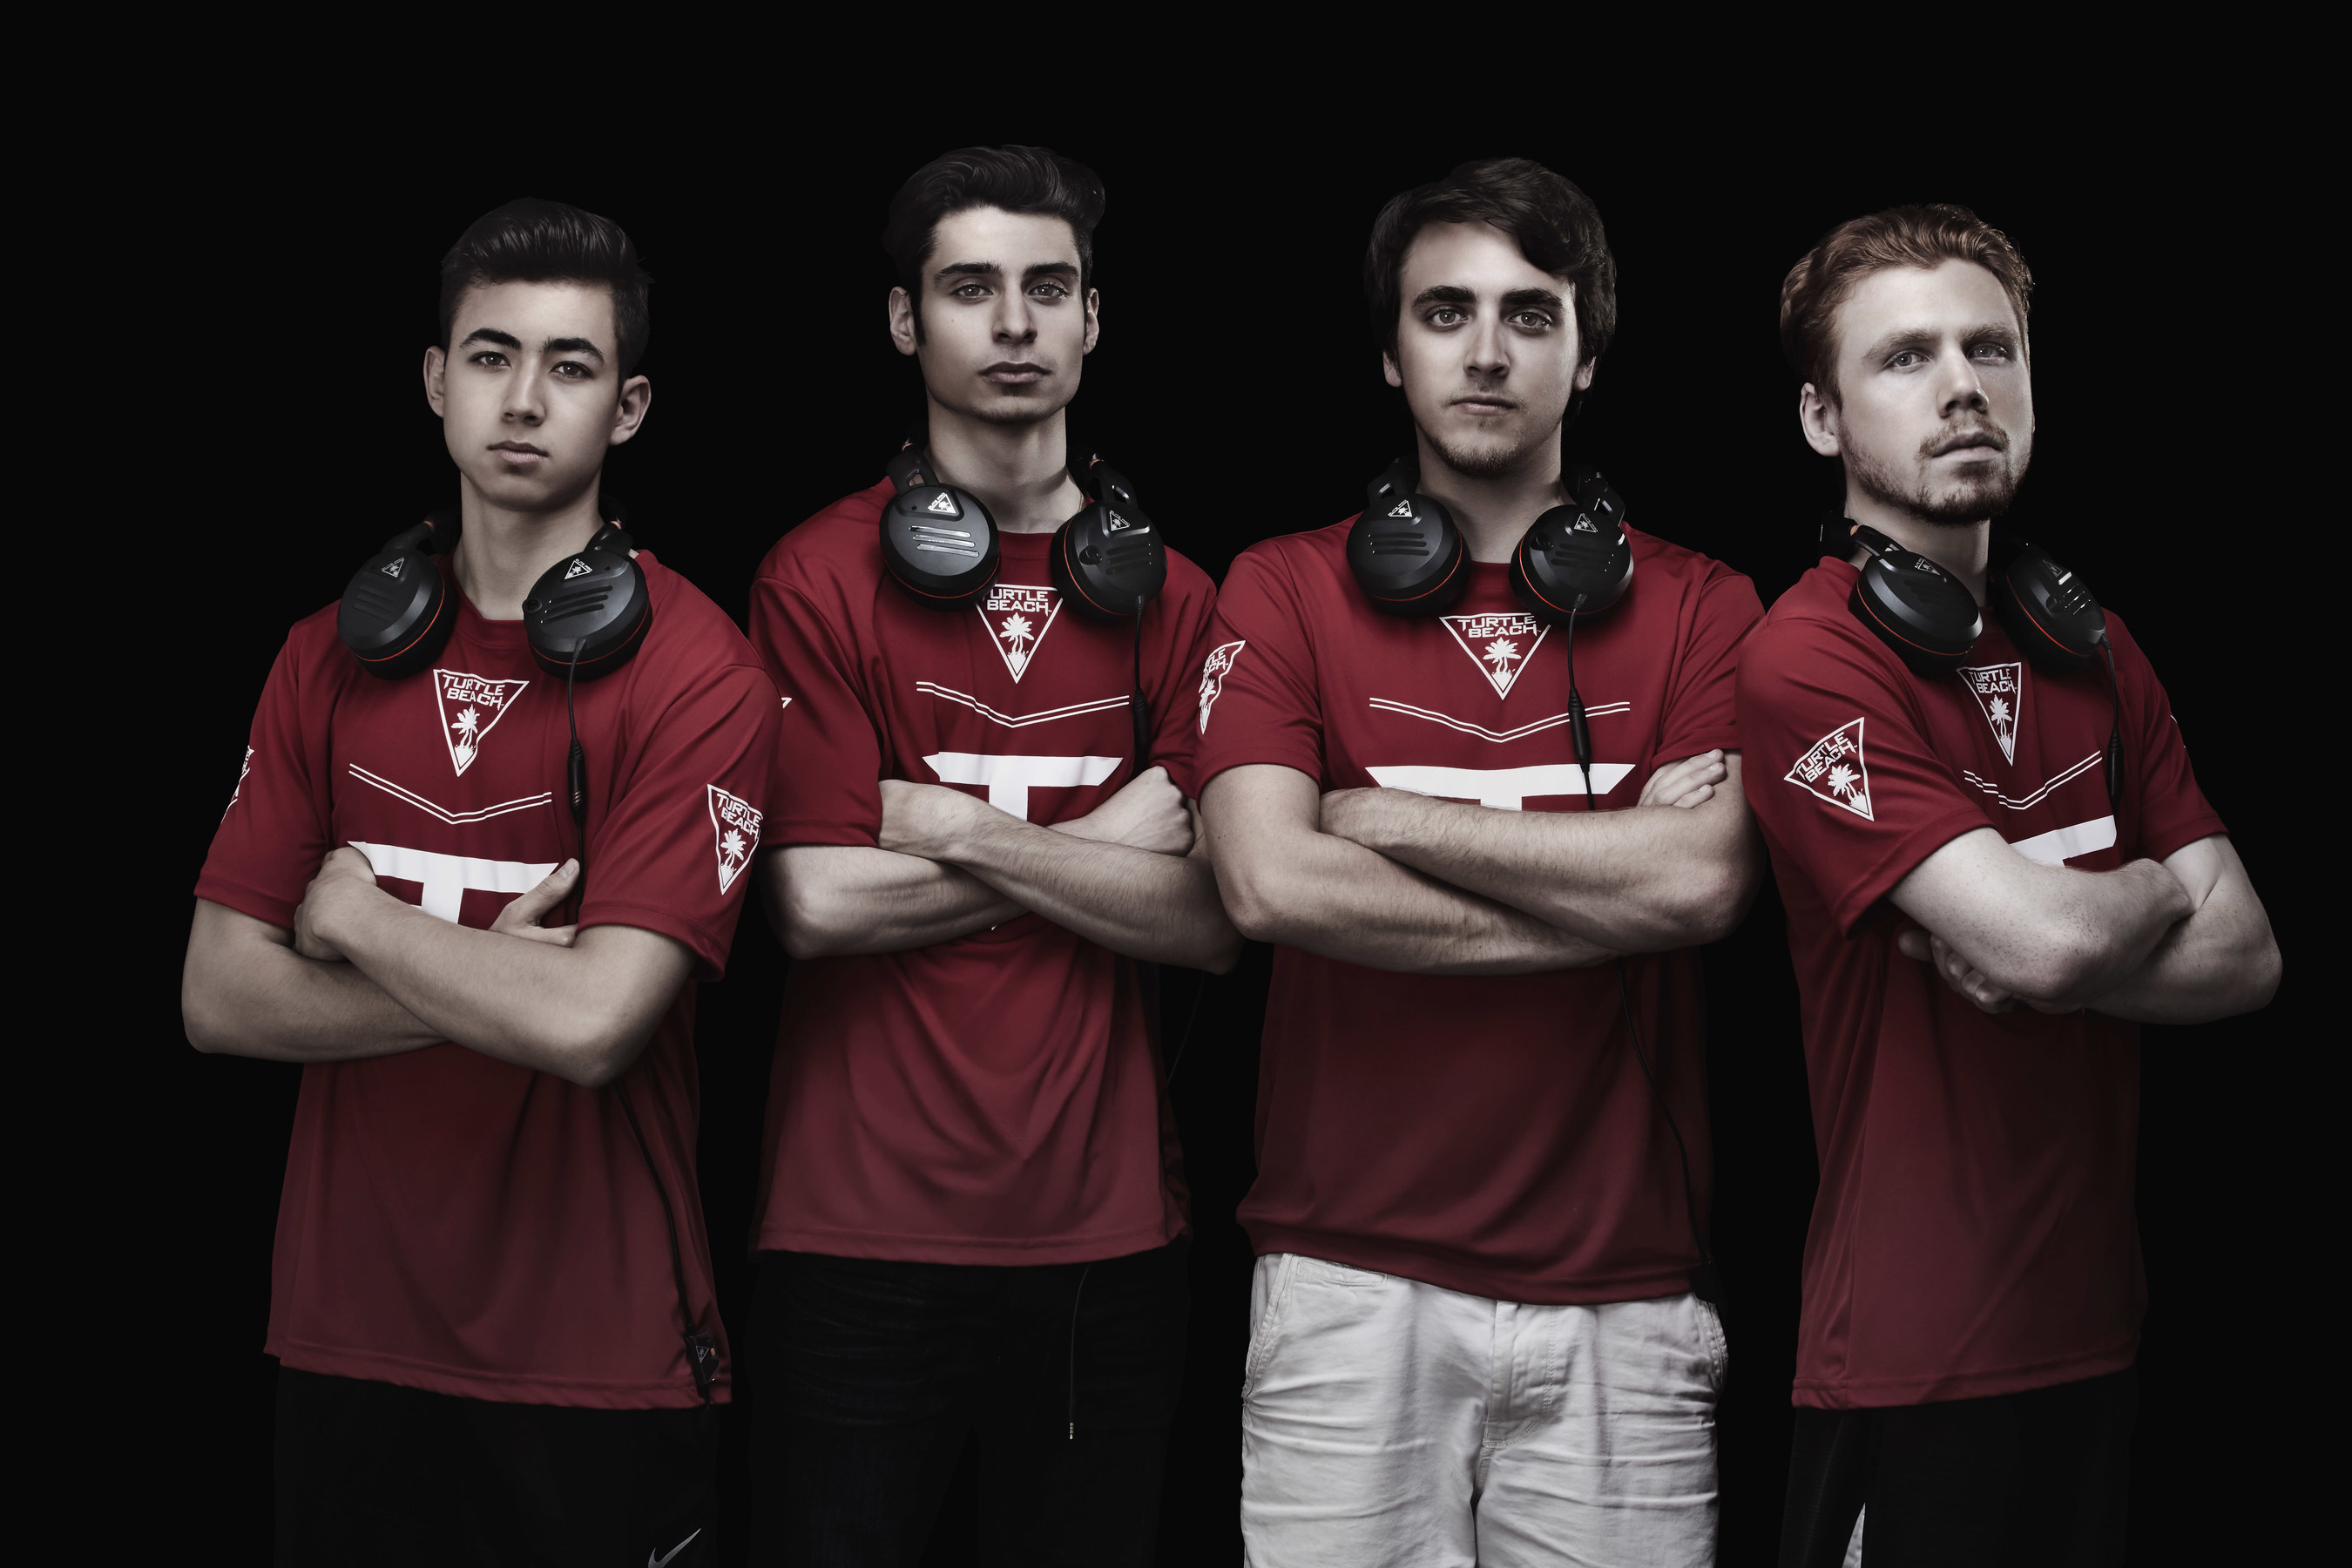 FaZe Clan Partners with Turtle Beach to use the all-new Elite Pro Tournament Gaming Headset, Elite Pro Tactical Audio Controller and other Elite Pro accessories as their competitive gaming audio gear of choice.